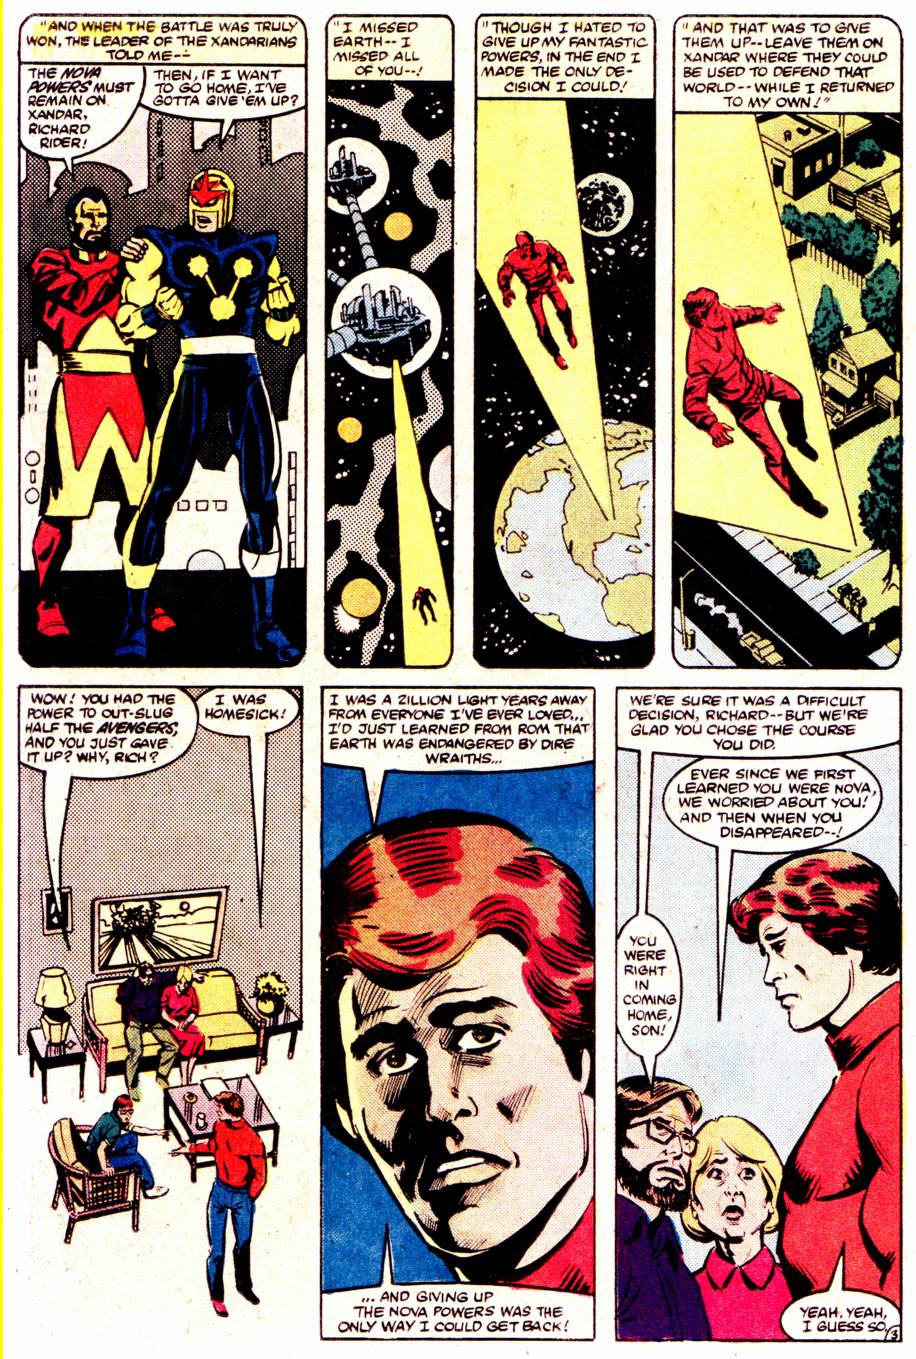 What If? (1977) issue 36 - The Fantastic Four Had Not Gained Their Powers - Page 24